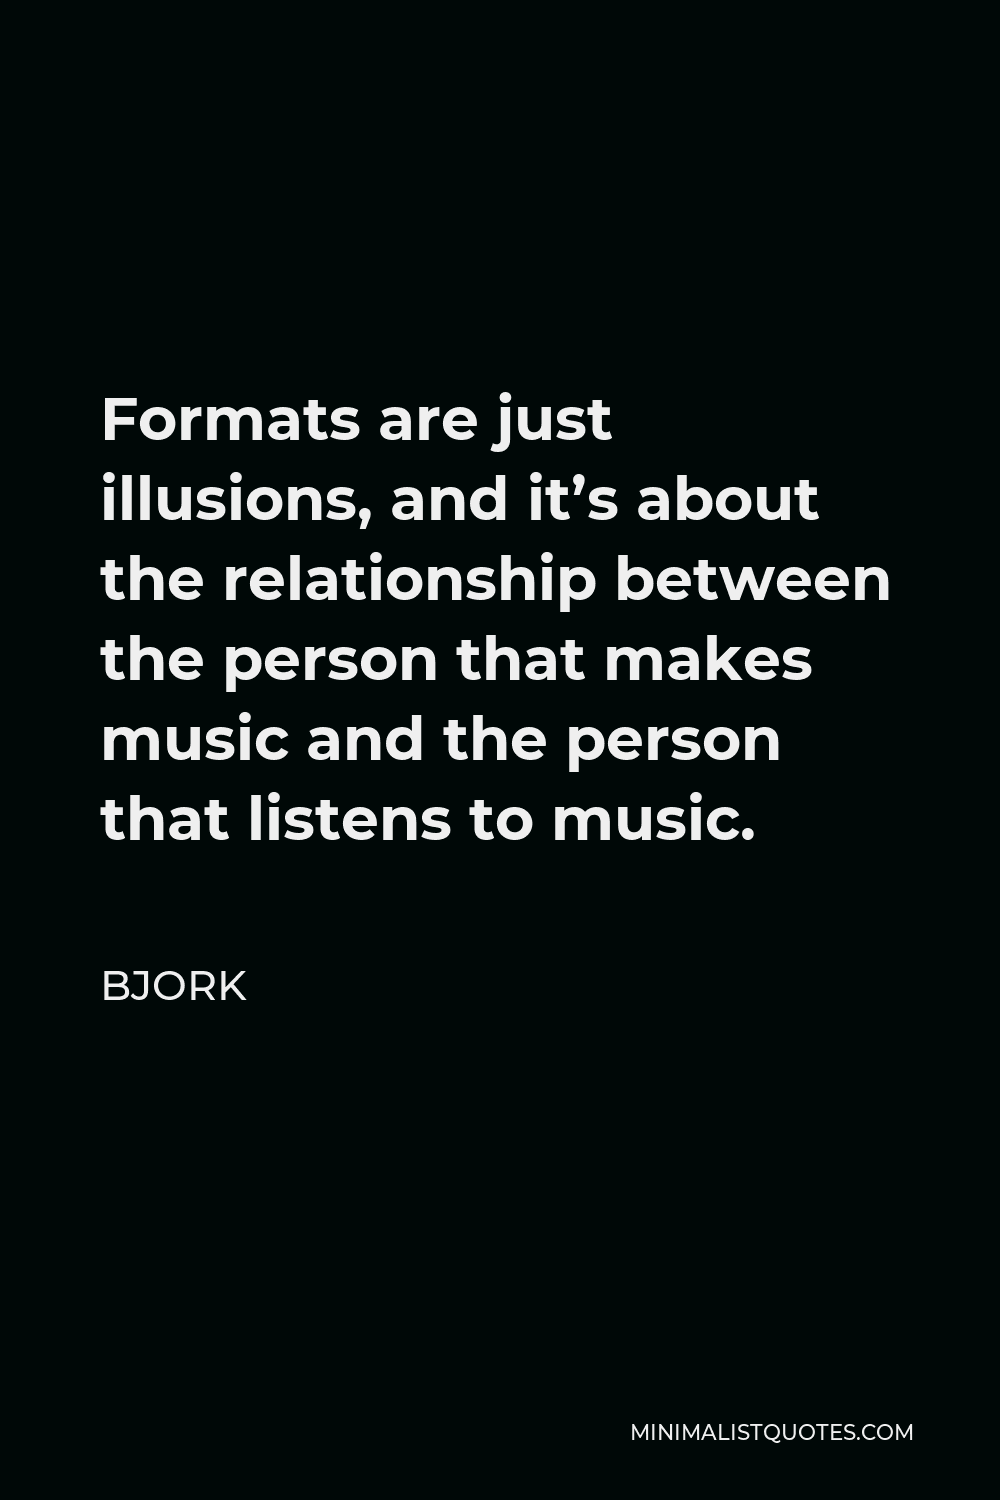 Bjork Quote - Formats are just illusions, and it’s about the relationship between the person that makes music and the person that listens to music.